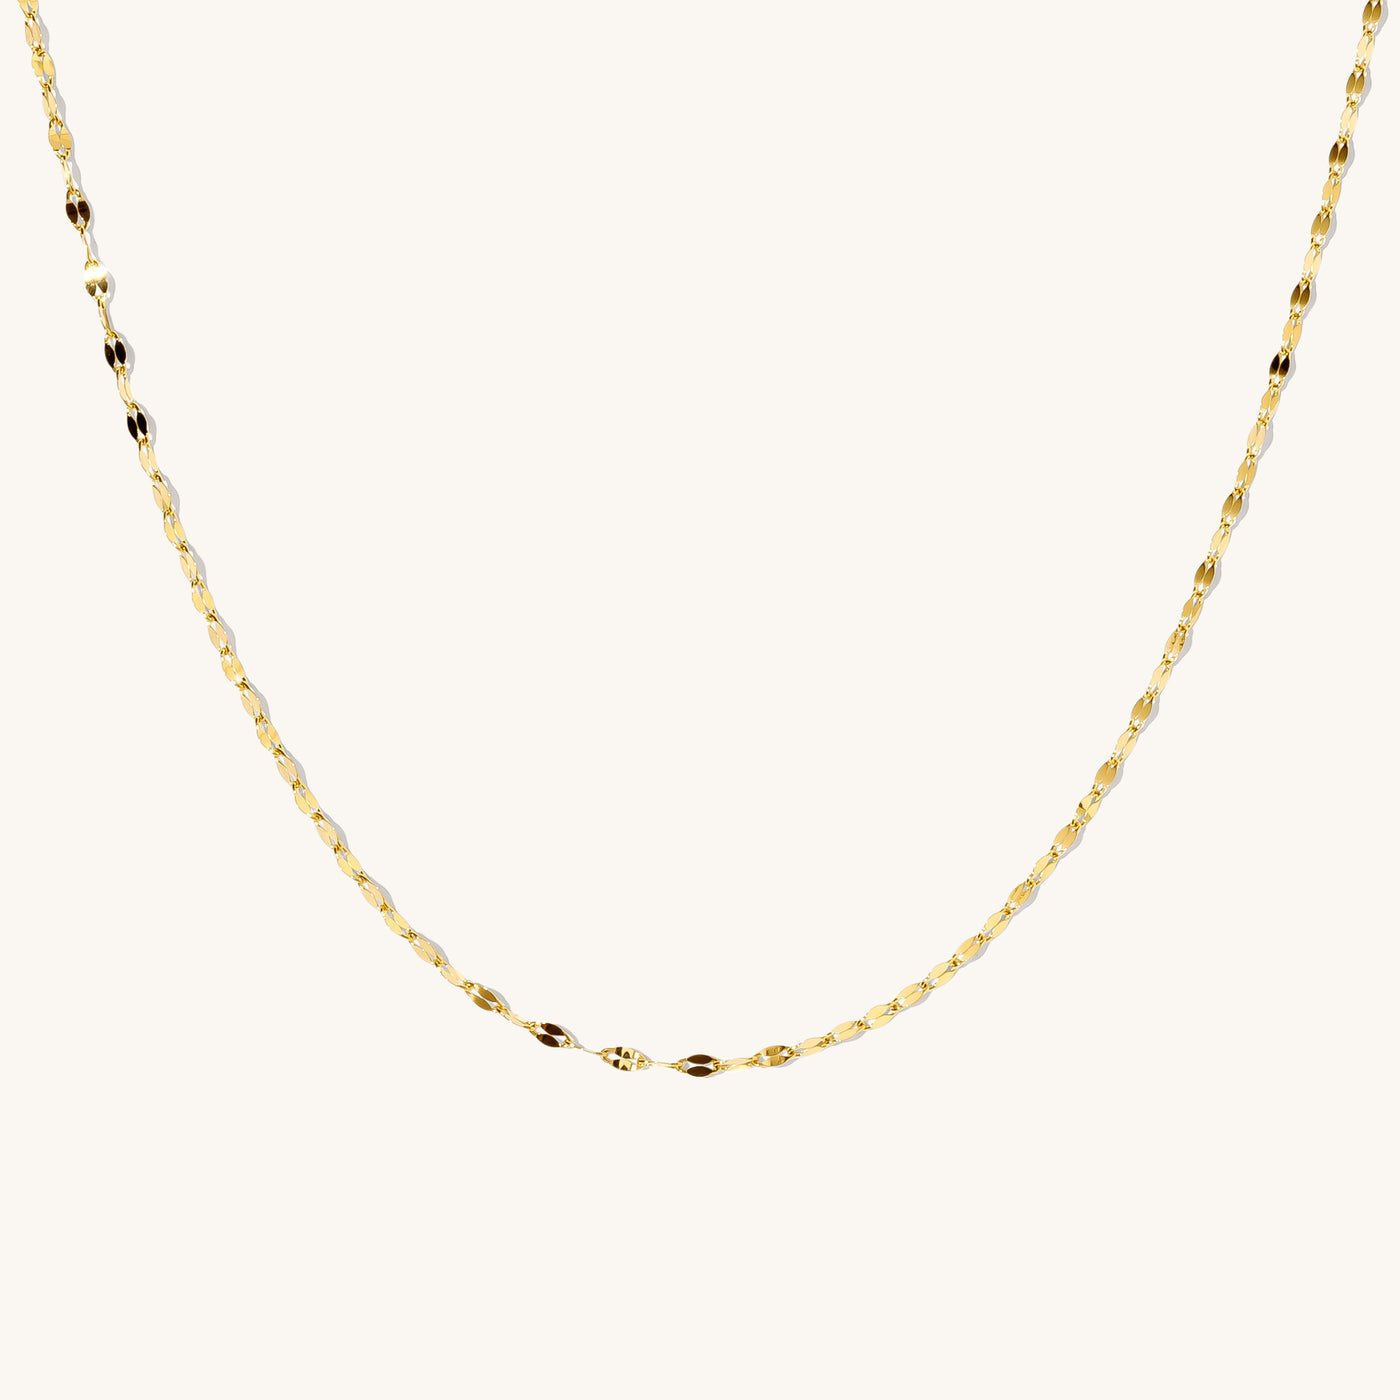 Twisted Lace Chain Necklace - 14k Solid Gold | Simple & Dainty Jewelry